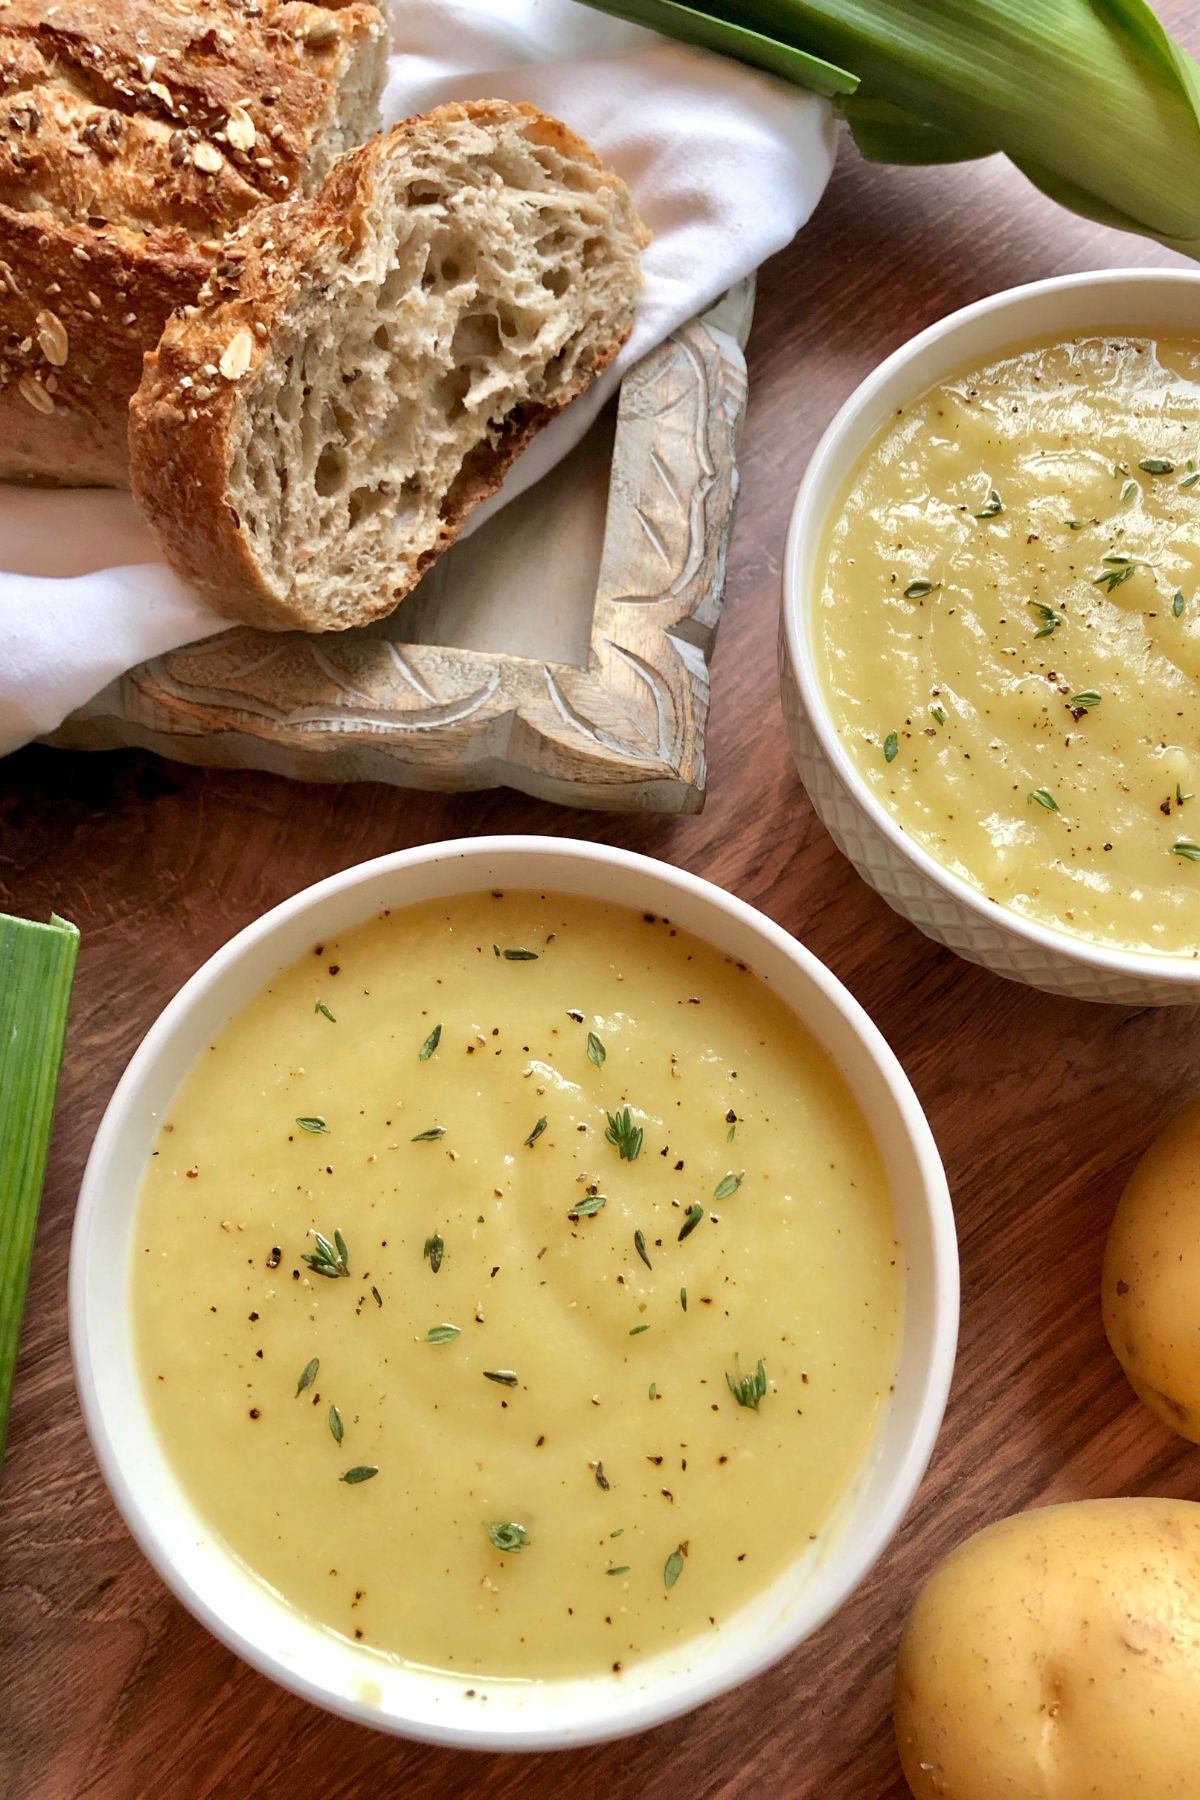 2 bowls of potato soup garnished with fresh thyme and black pepper with fresh leeks and potatoes off to side. A loaf of wheat crusty bread is on a napkin in the upper corner.